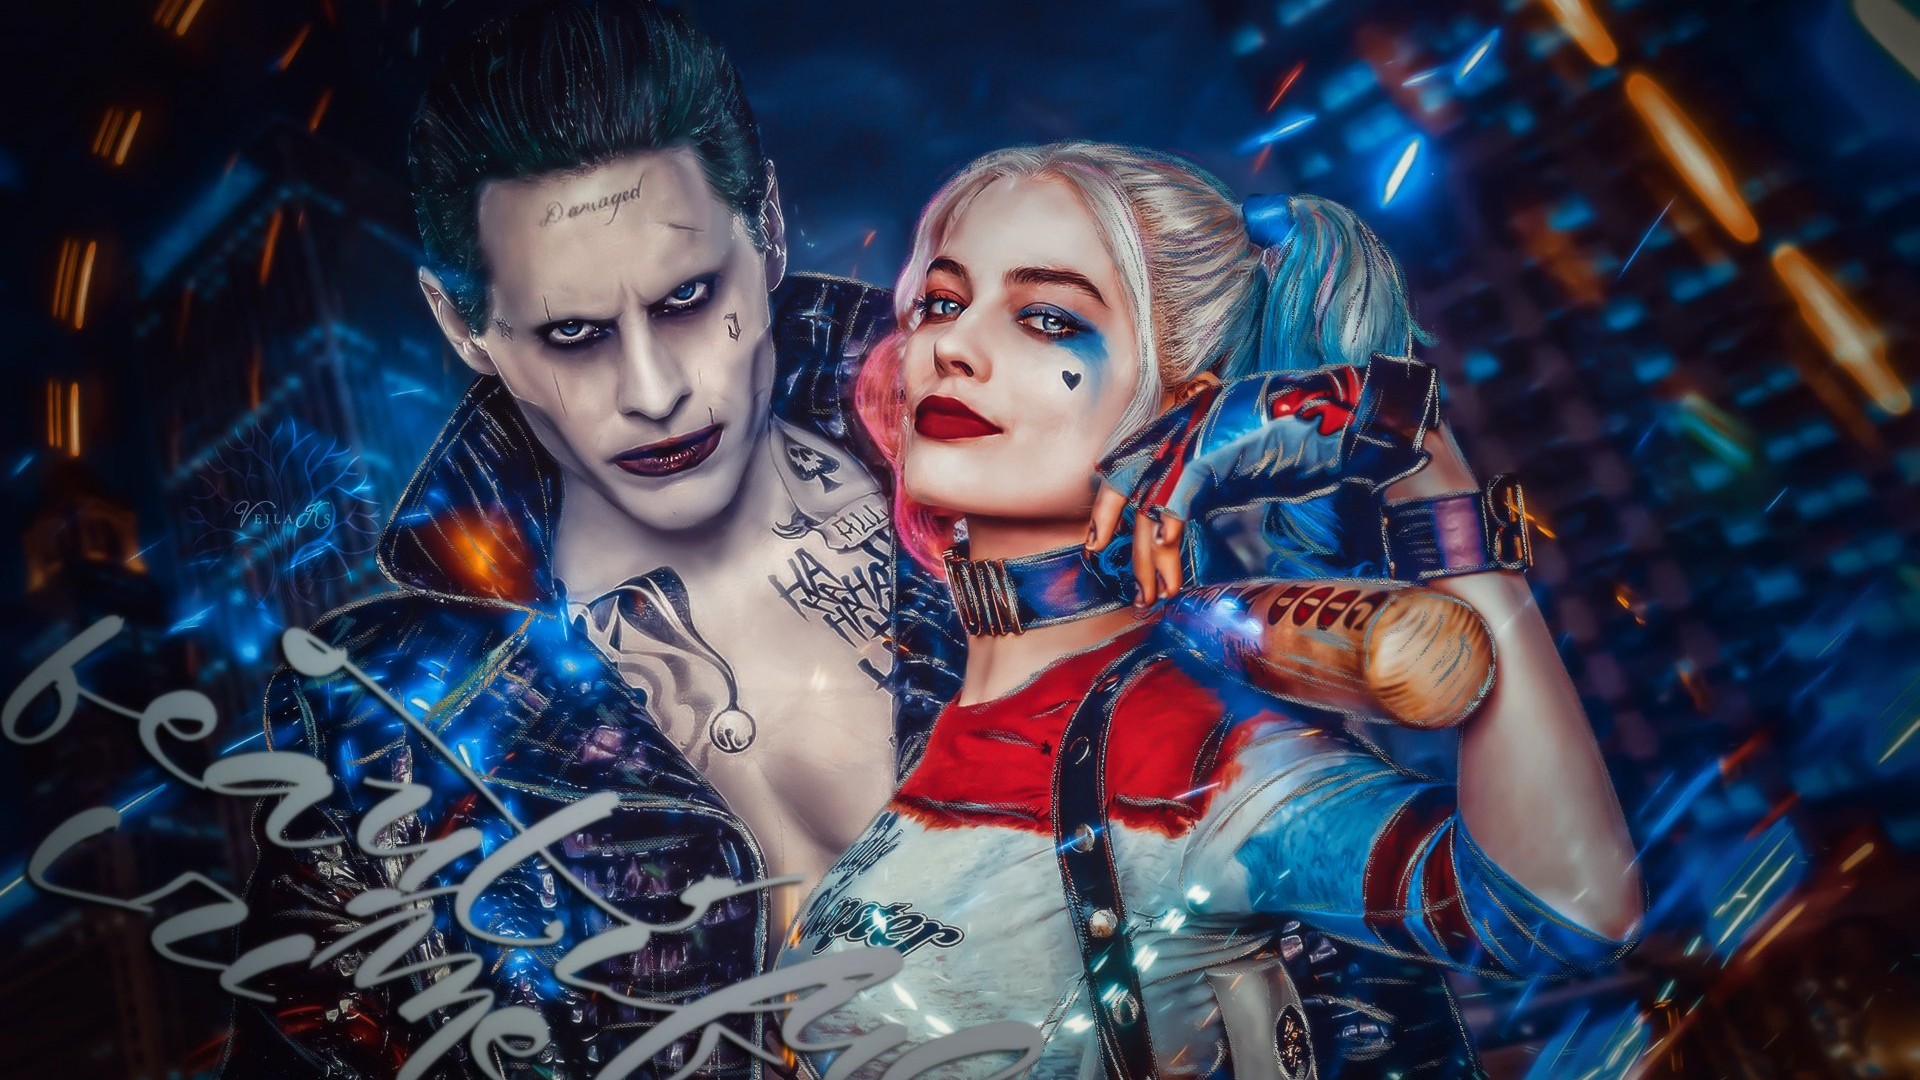 Wallpaper Harley Quinn and Joker Desktop with resolution 1920X1080 pixel. You can use this wallpaper as background for your desktop Computer Screensavers, Android or iPhone smartphones